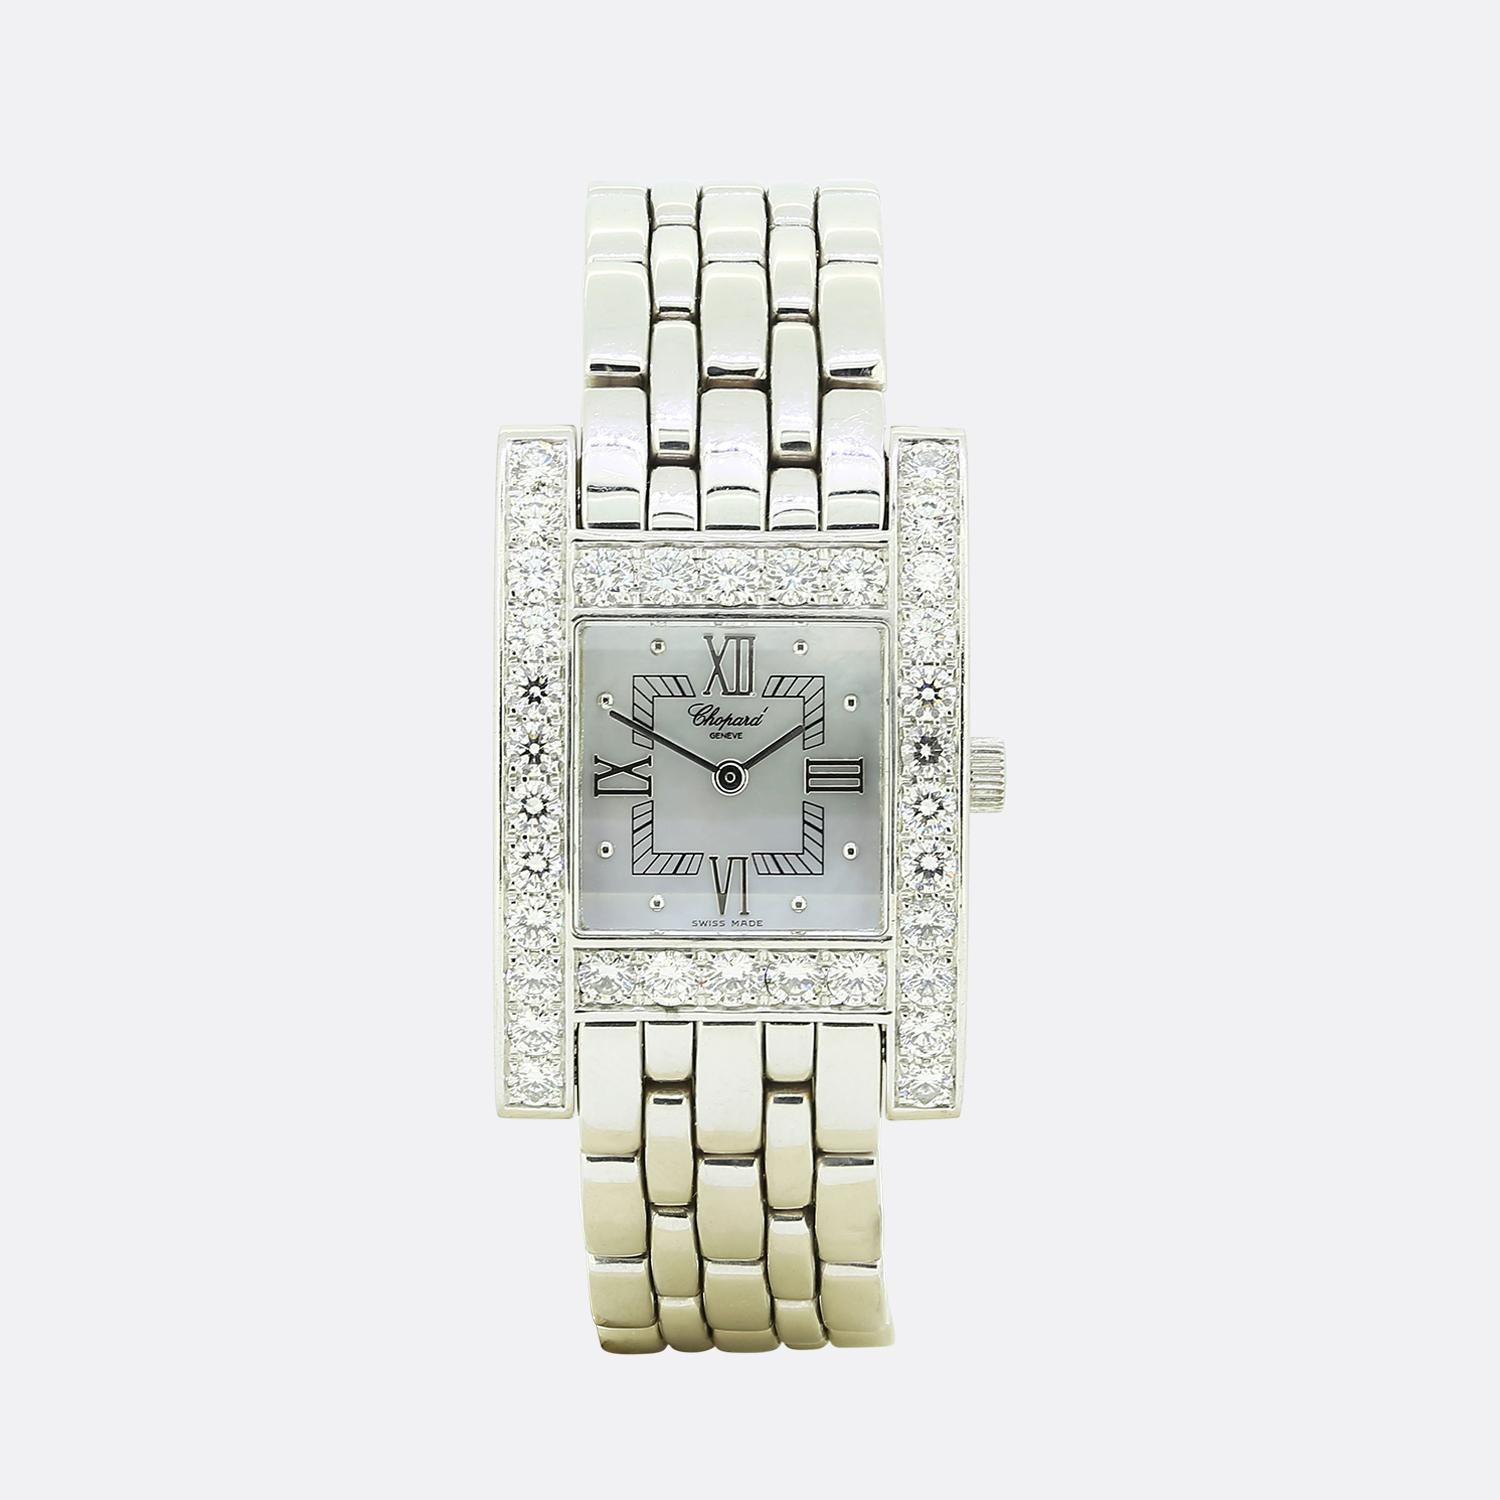 Here we have a wonderful 18k white gold Chopard H Your Hour wristwatch. The watch features a mother of pearl dial with Roman numerals and 34 bezel set round brilliant diamonds. The 18k white gold bracelet, features a 18k white gold jewellery style